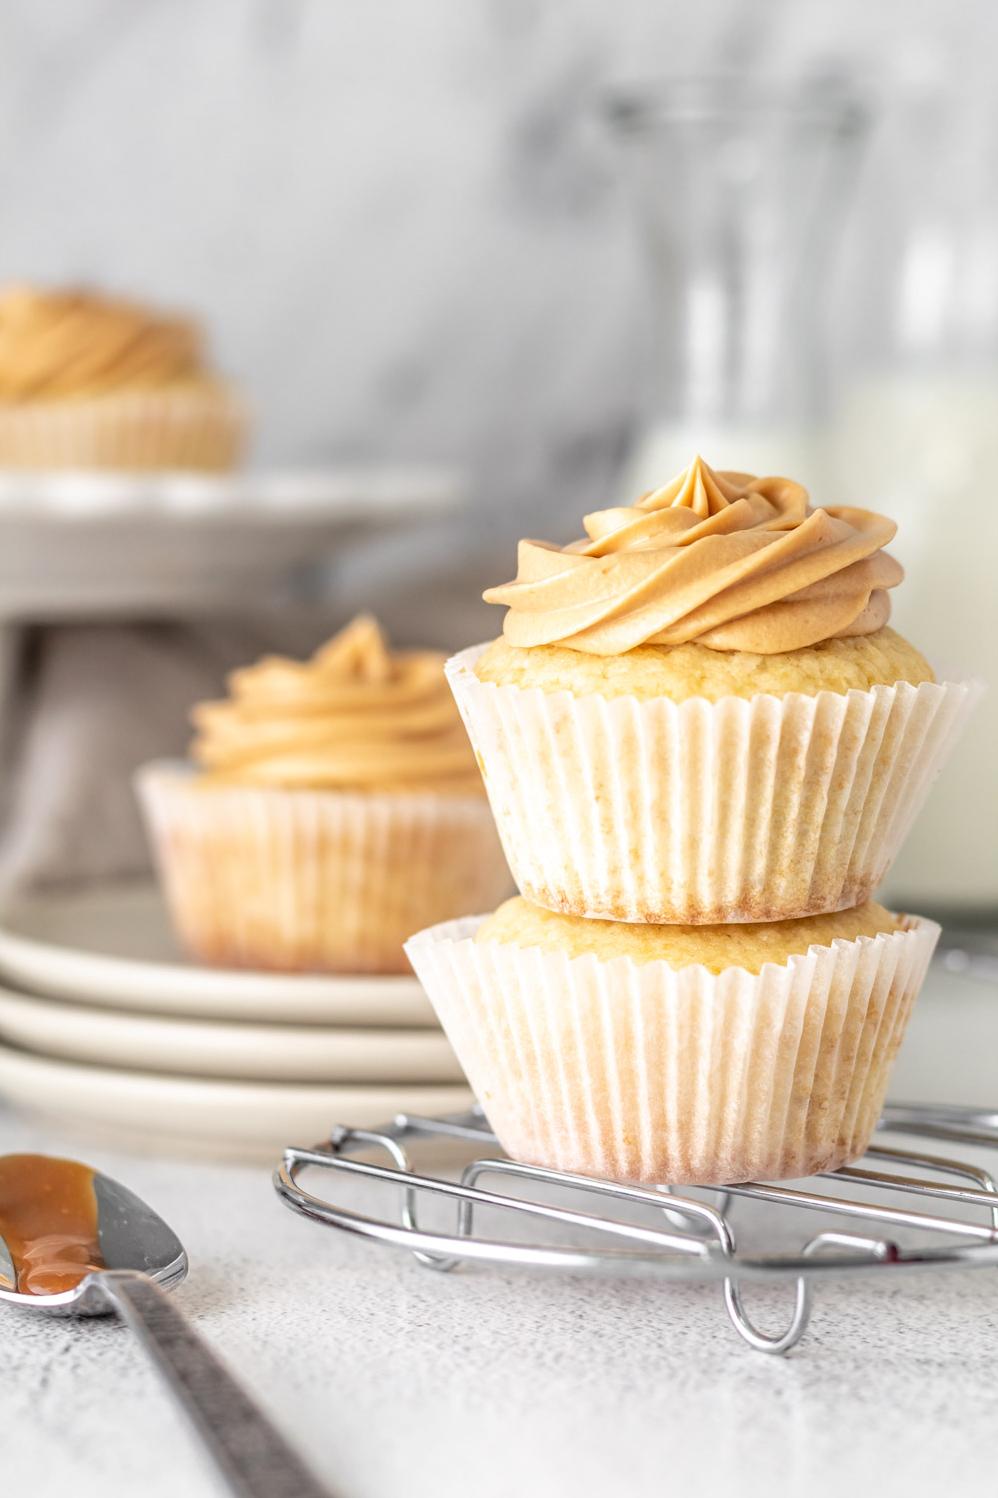  Sweeten your day with these heavenly Dulce De Leche cupcakes!